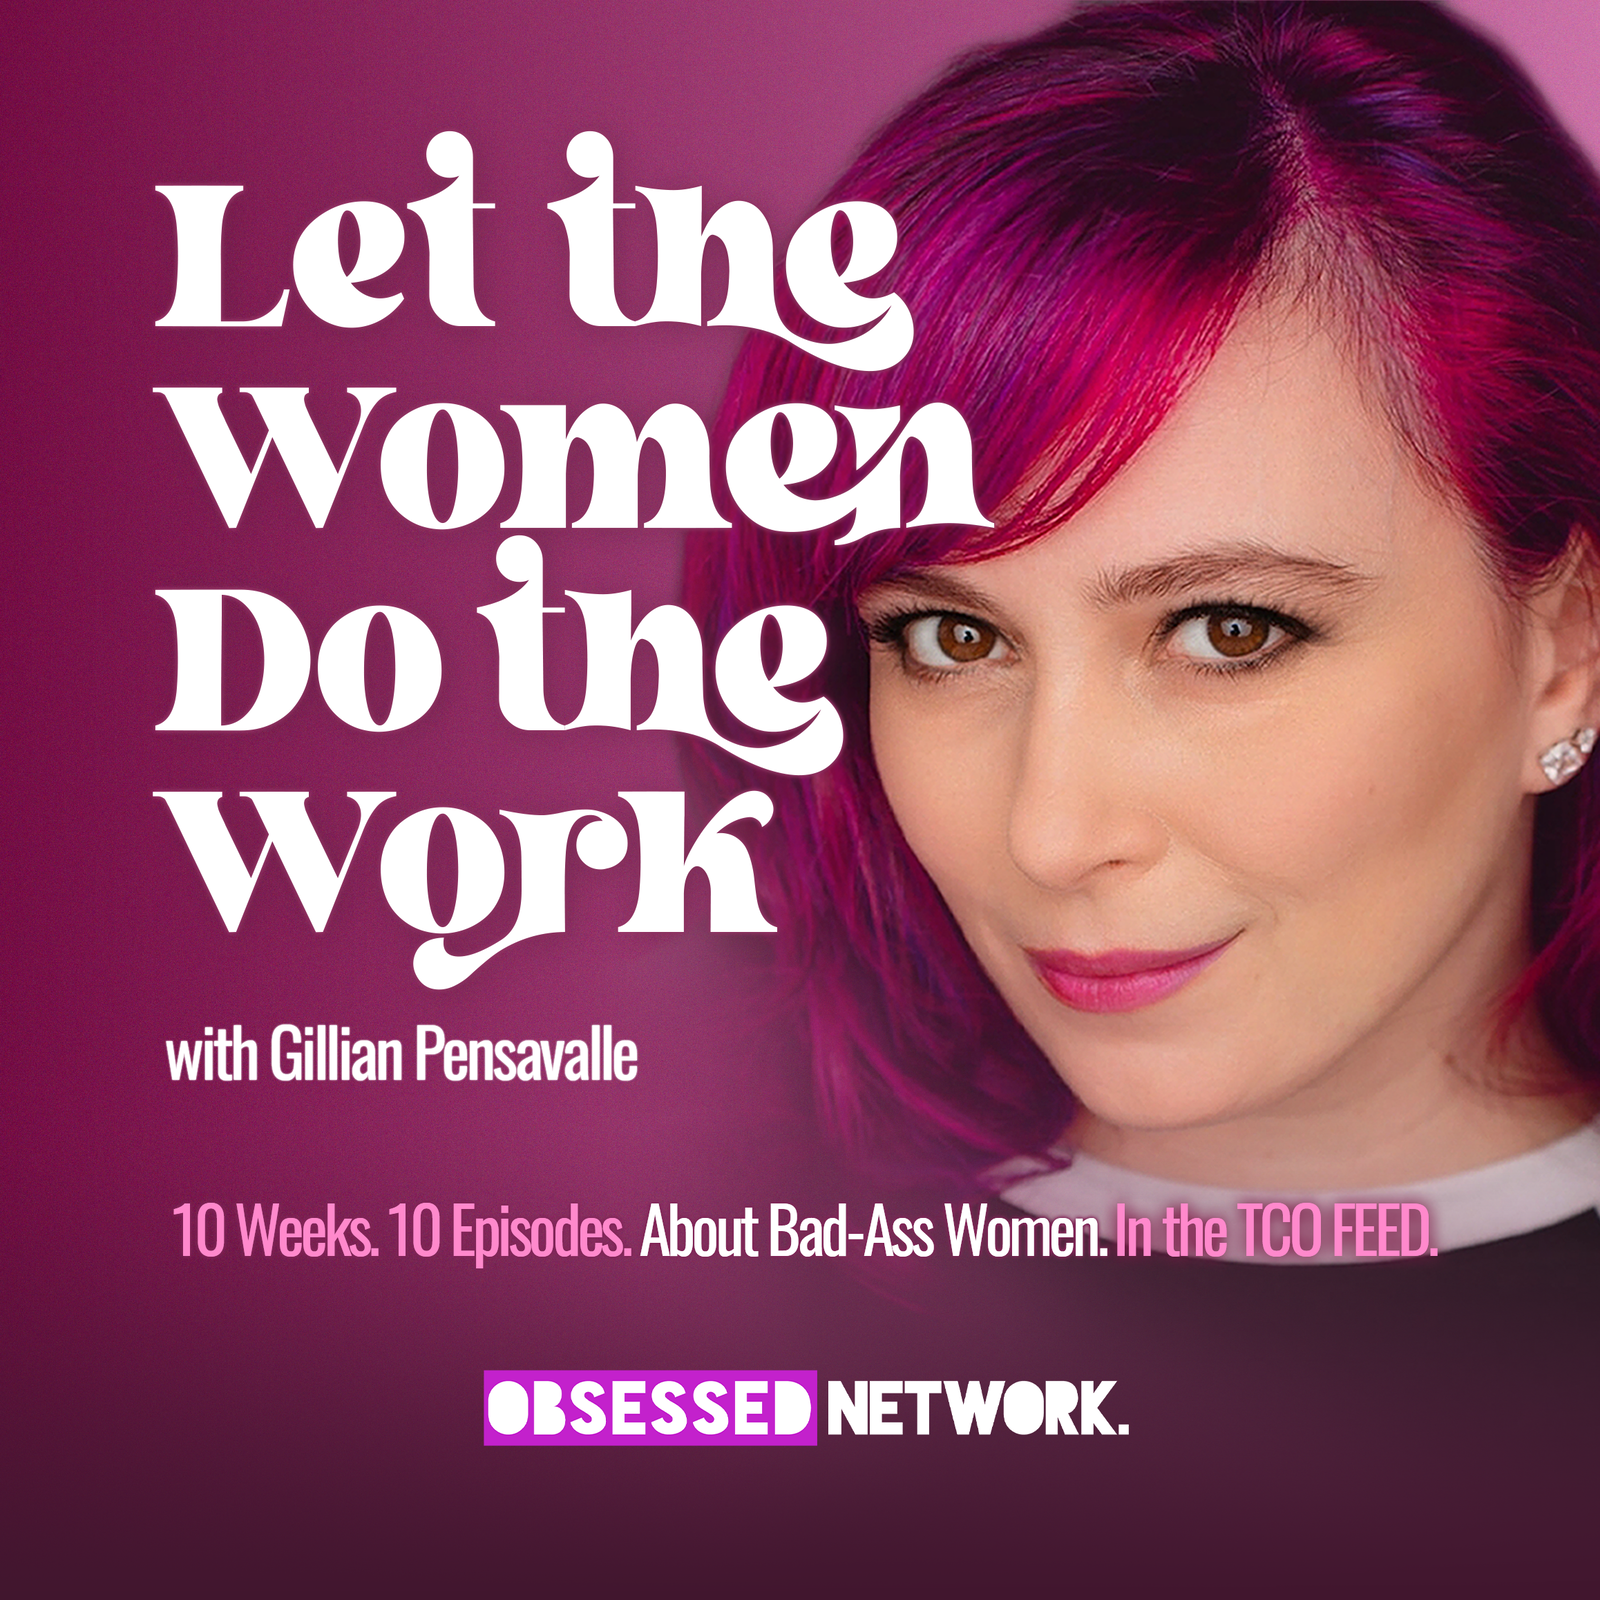 Introducing: Let The Women Do The Work with Gillian Pensavalle by Obsessed Network